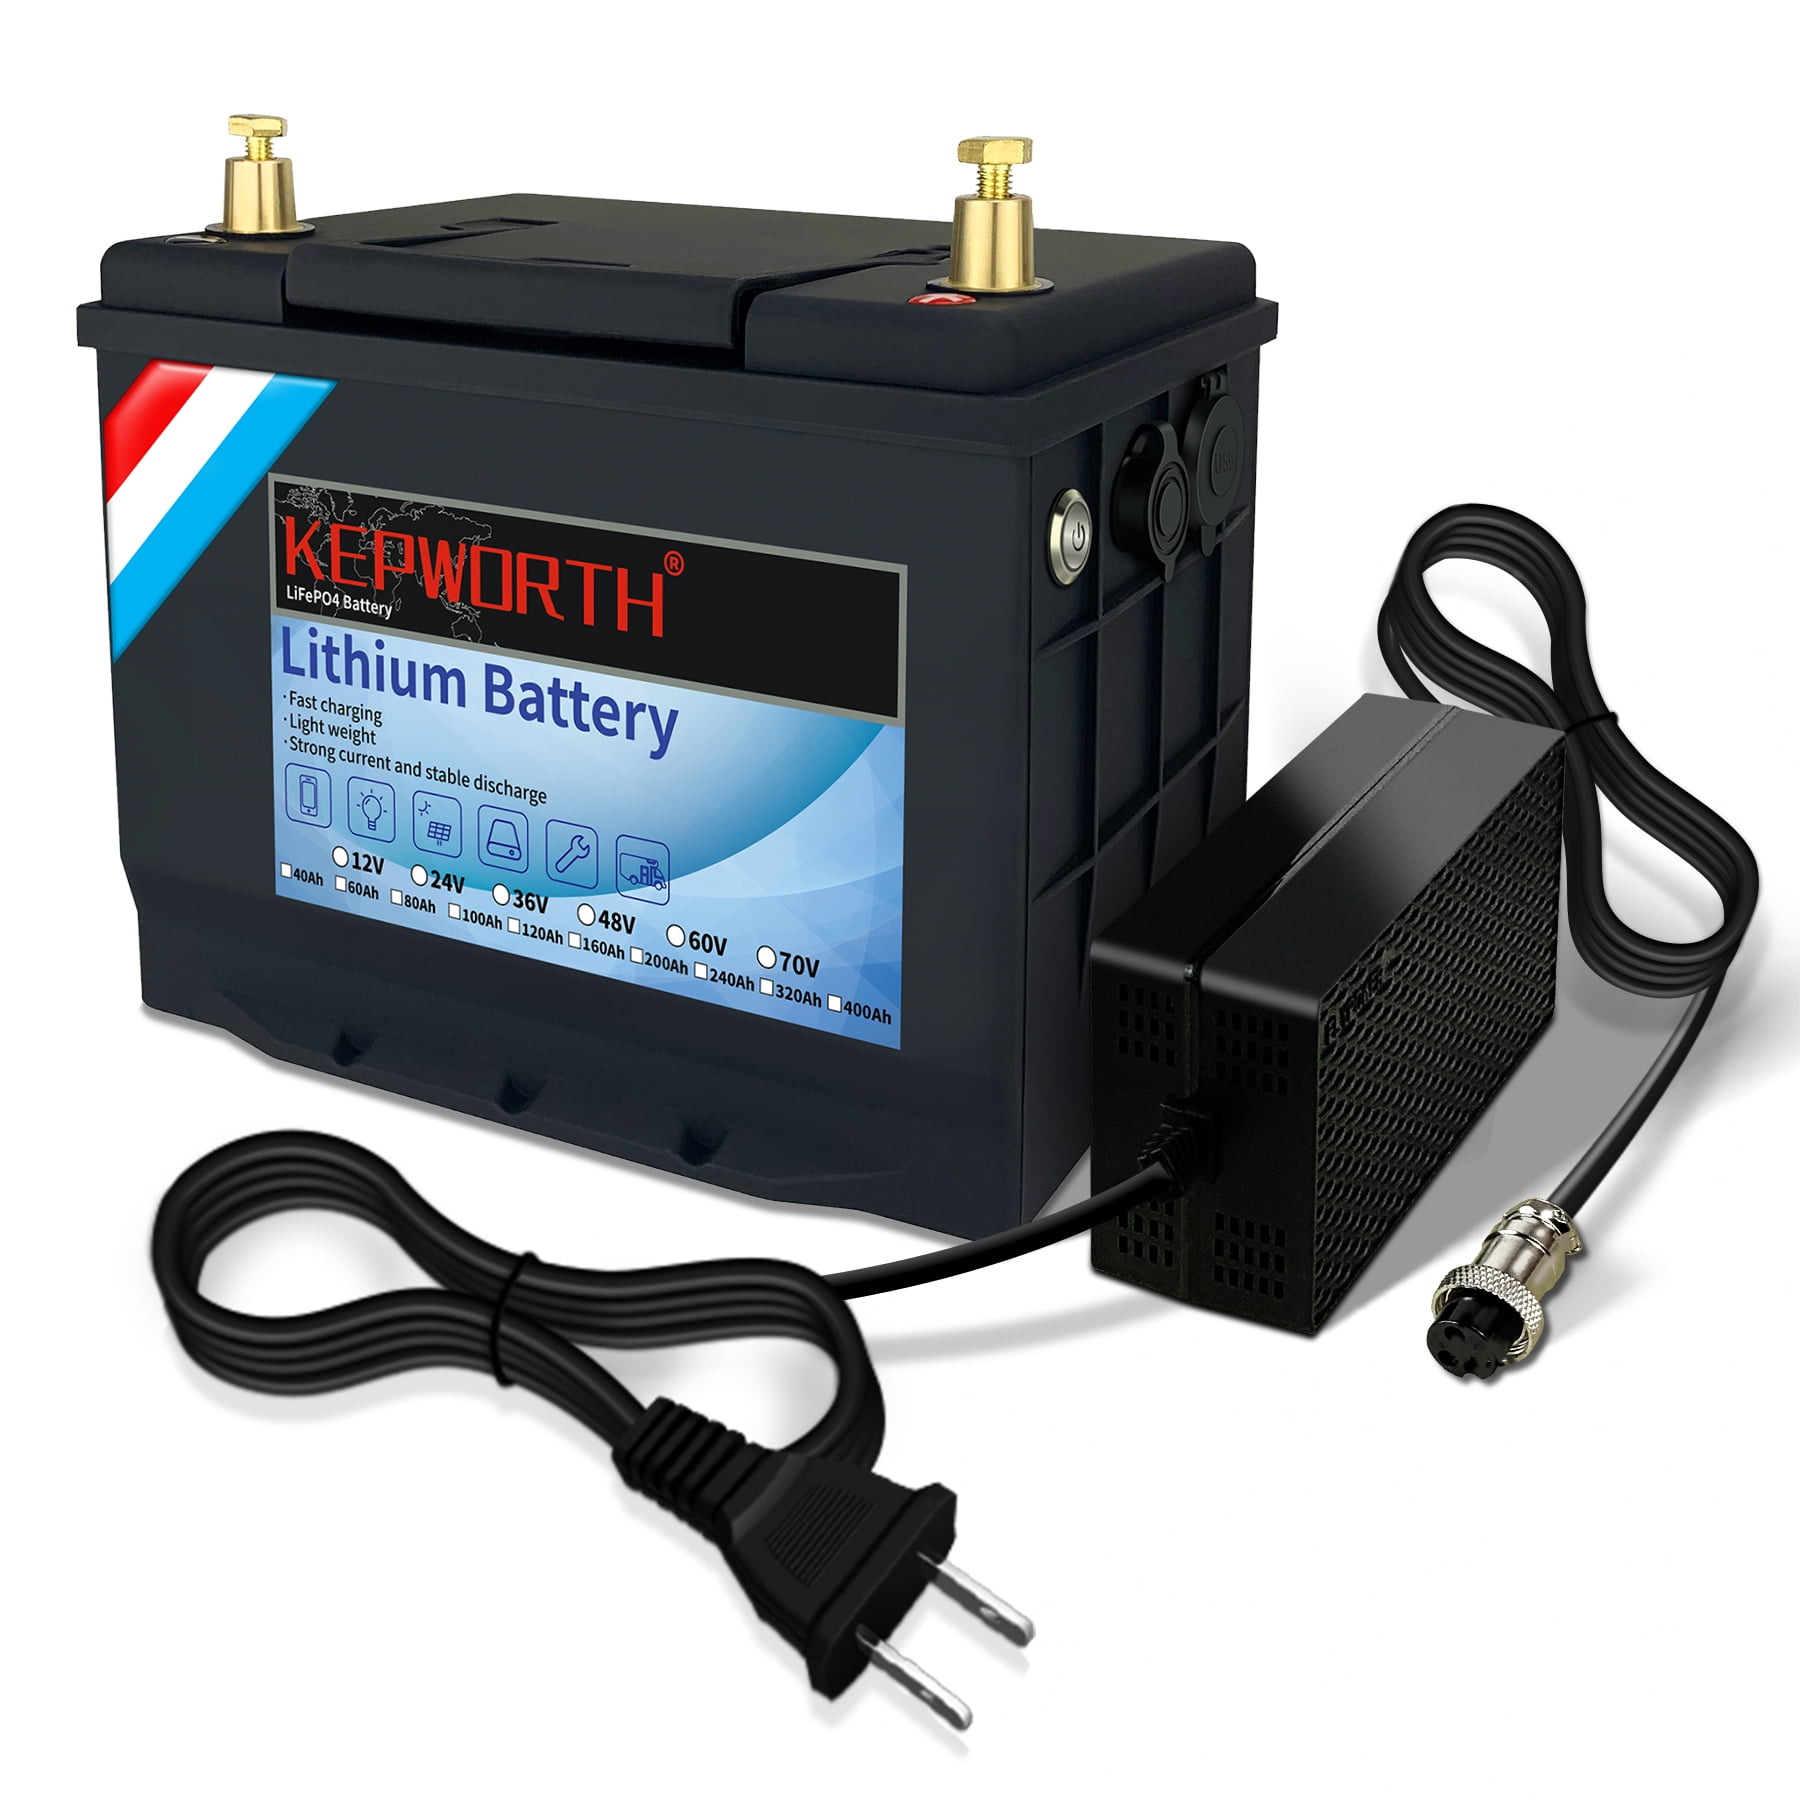  KEPWORTH 12V 60Ah LiFePO4 Battery Deep Cycle Lithium Iron  Phosphate Battery Built-in BMS Lightweight Maintenance-Free Perfect for  RV/Camping, Solar/Backup Power,Trolling,Motor/5-Years Warranty : Automotive